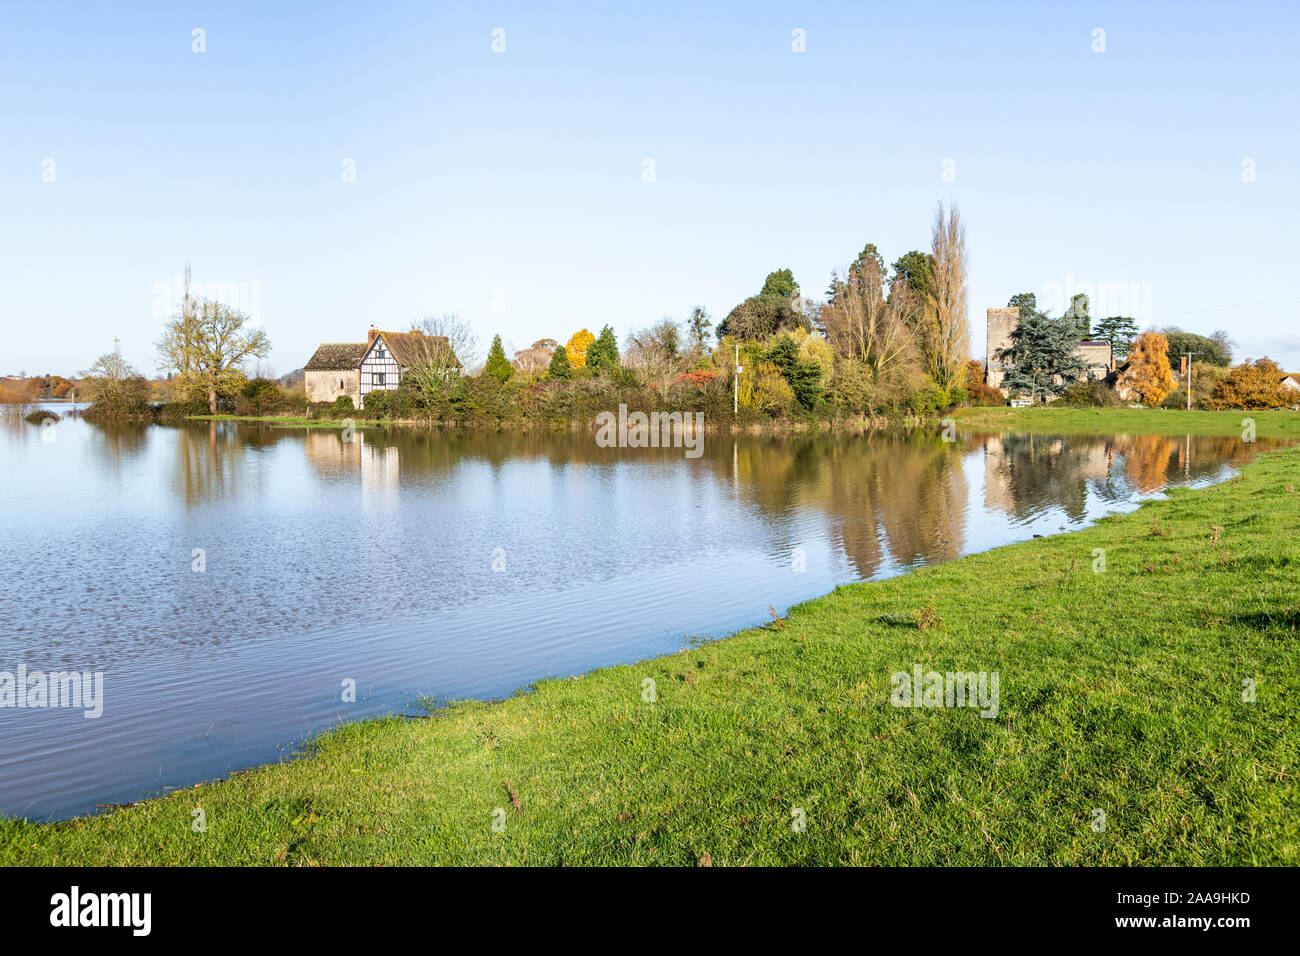 Oddas Chapel & St Marys Church with River Severn washwater filling fields around the Severn vale village of Deerhurst, Gloucestershire UK 18/11/2019 Foto Stock